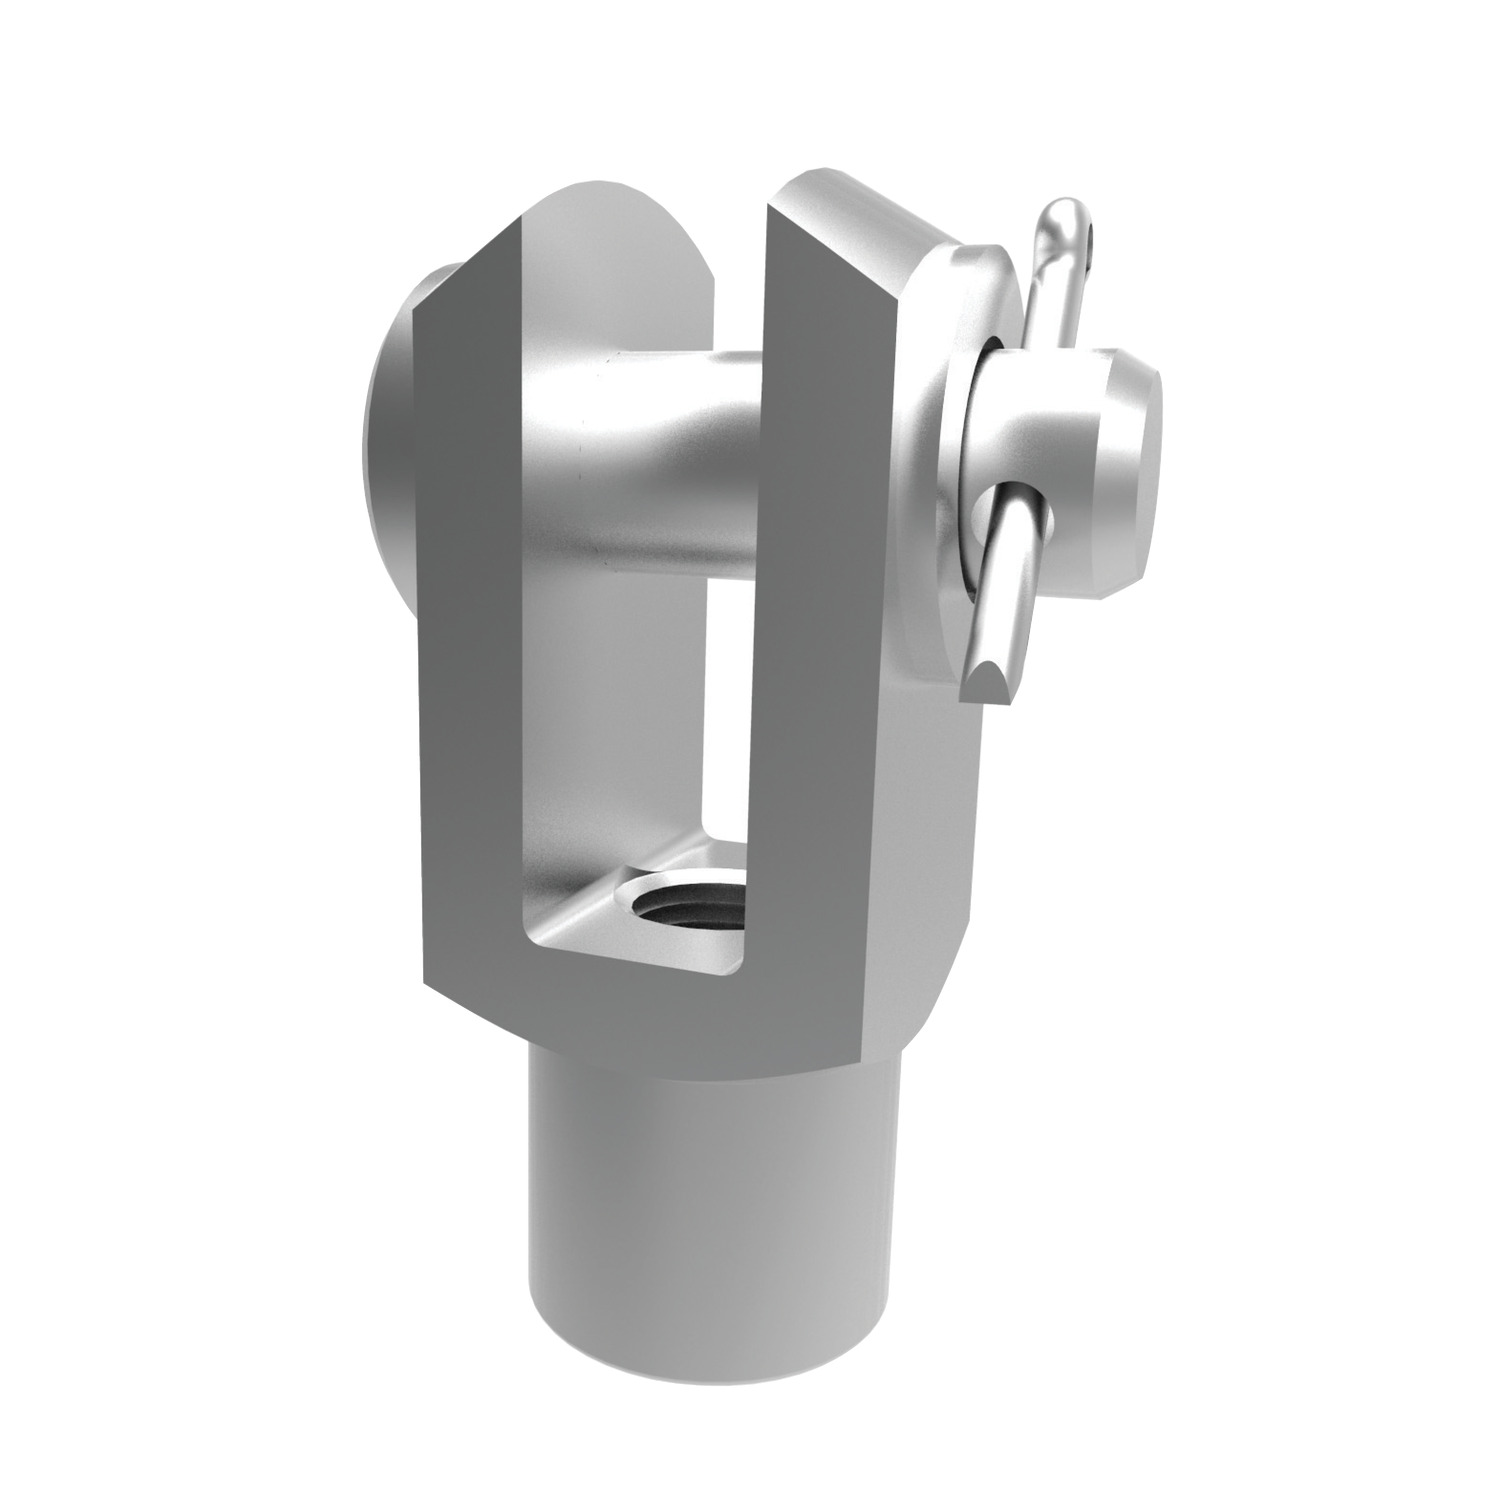 Clevis Joints - Steel Our steel female clevis joints are available both with and without a retention clip. Right and Left hand thread available.